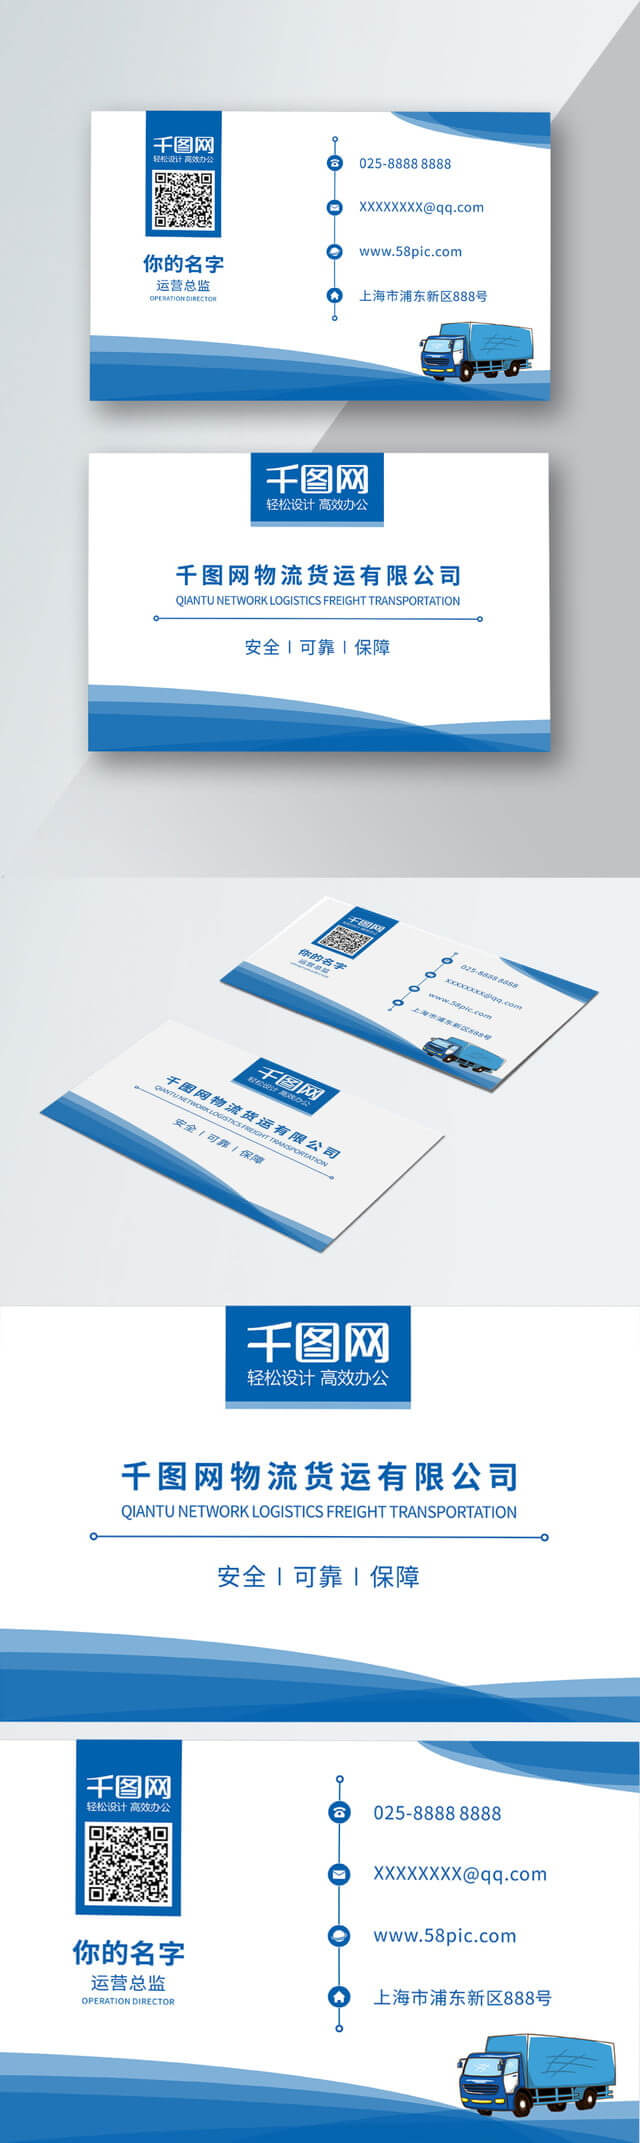 Cargo Company Business Card Material Download Shipping Inside Transport Business Cards Templates Free